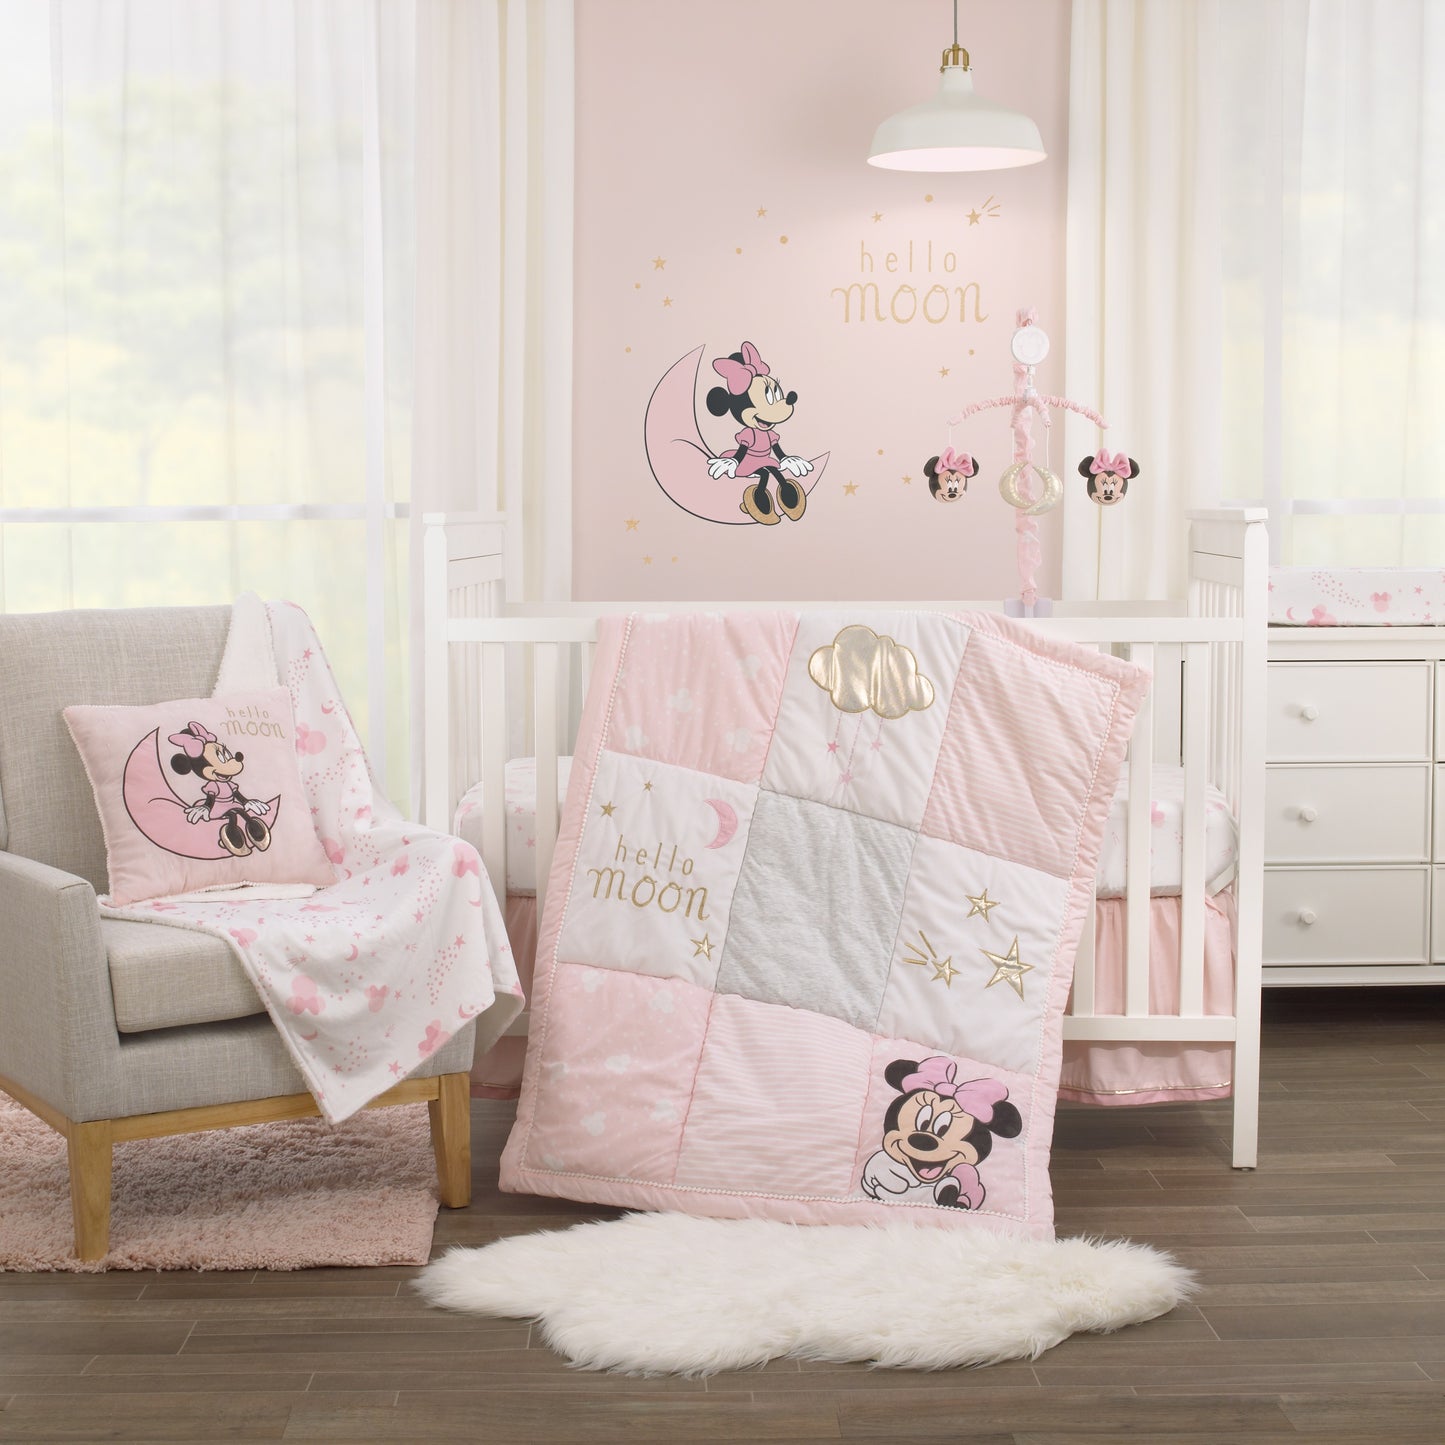 Disney Minnie Mouse Twinkle Twinkle Minnie Pink, White and Metallic Gold 3 Piece Crib Bedding Set